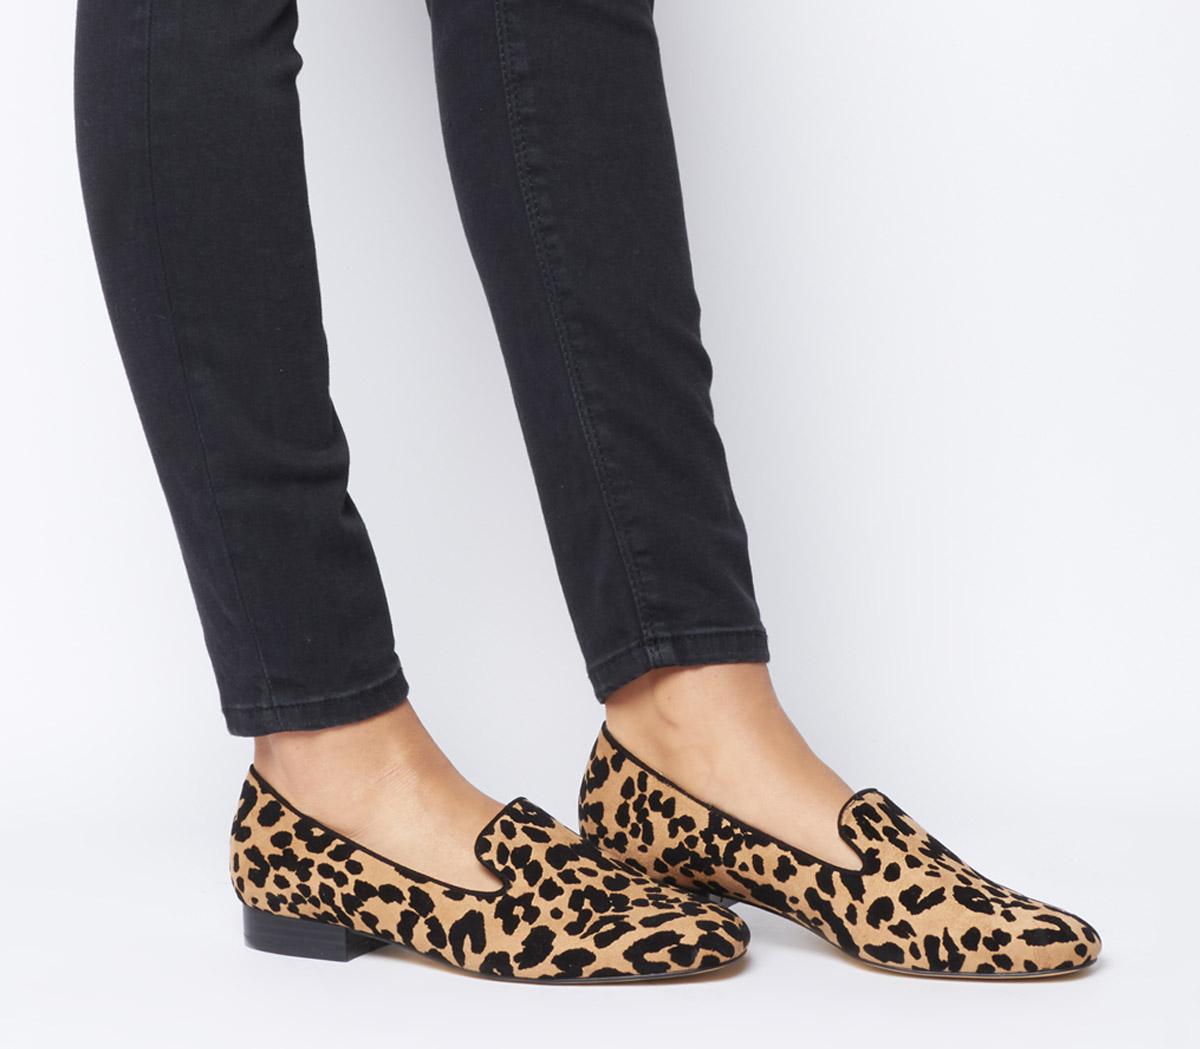 OFFICE Floating Slippers Leopard - Flat Shoes for Women